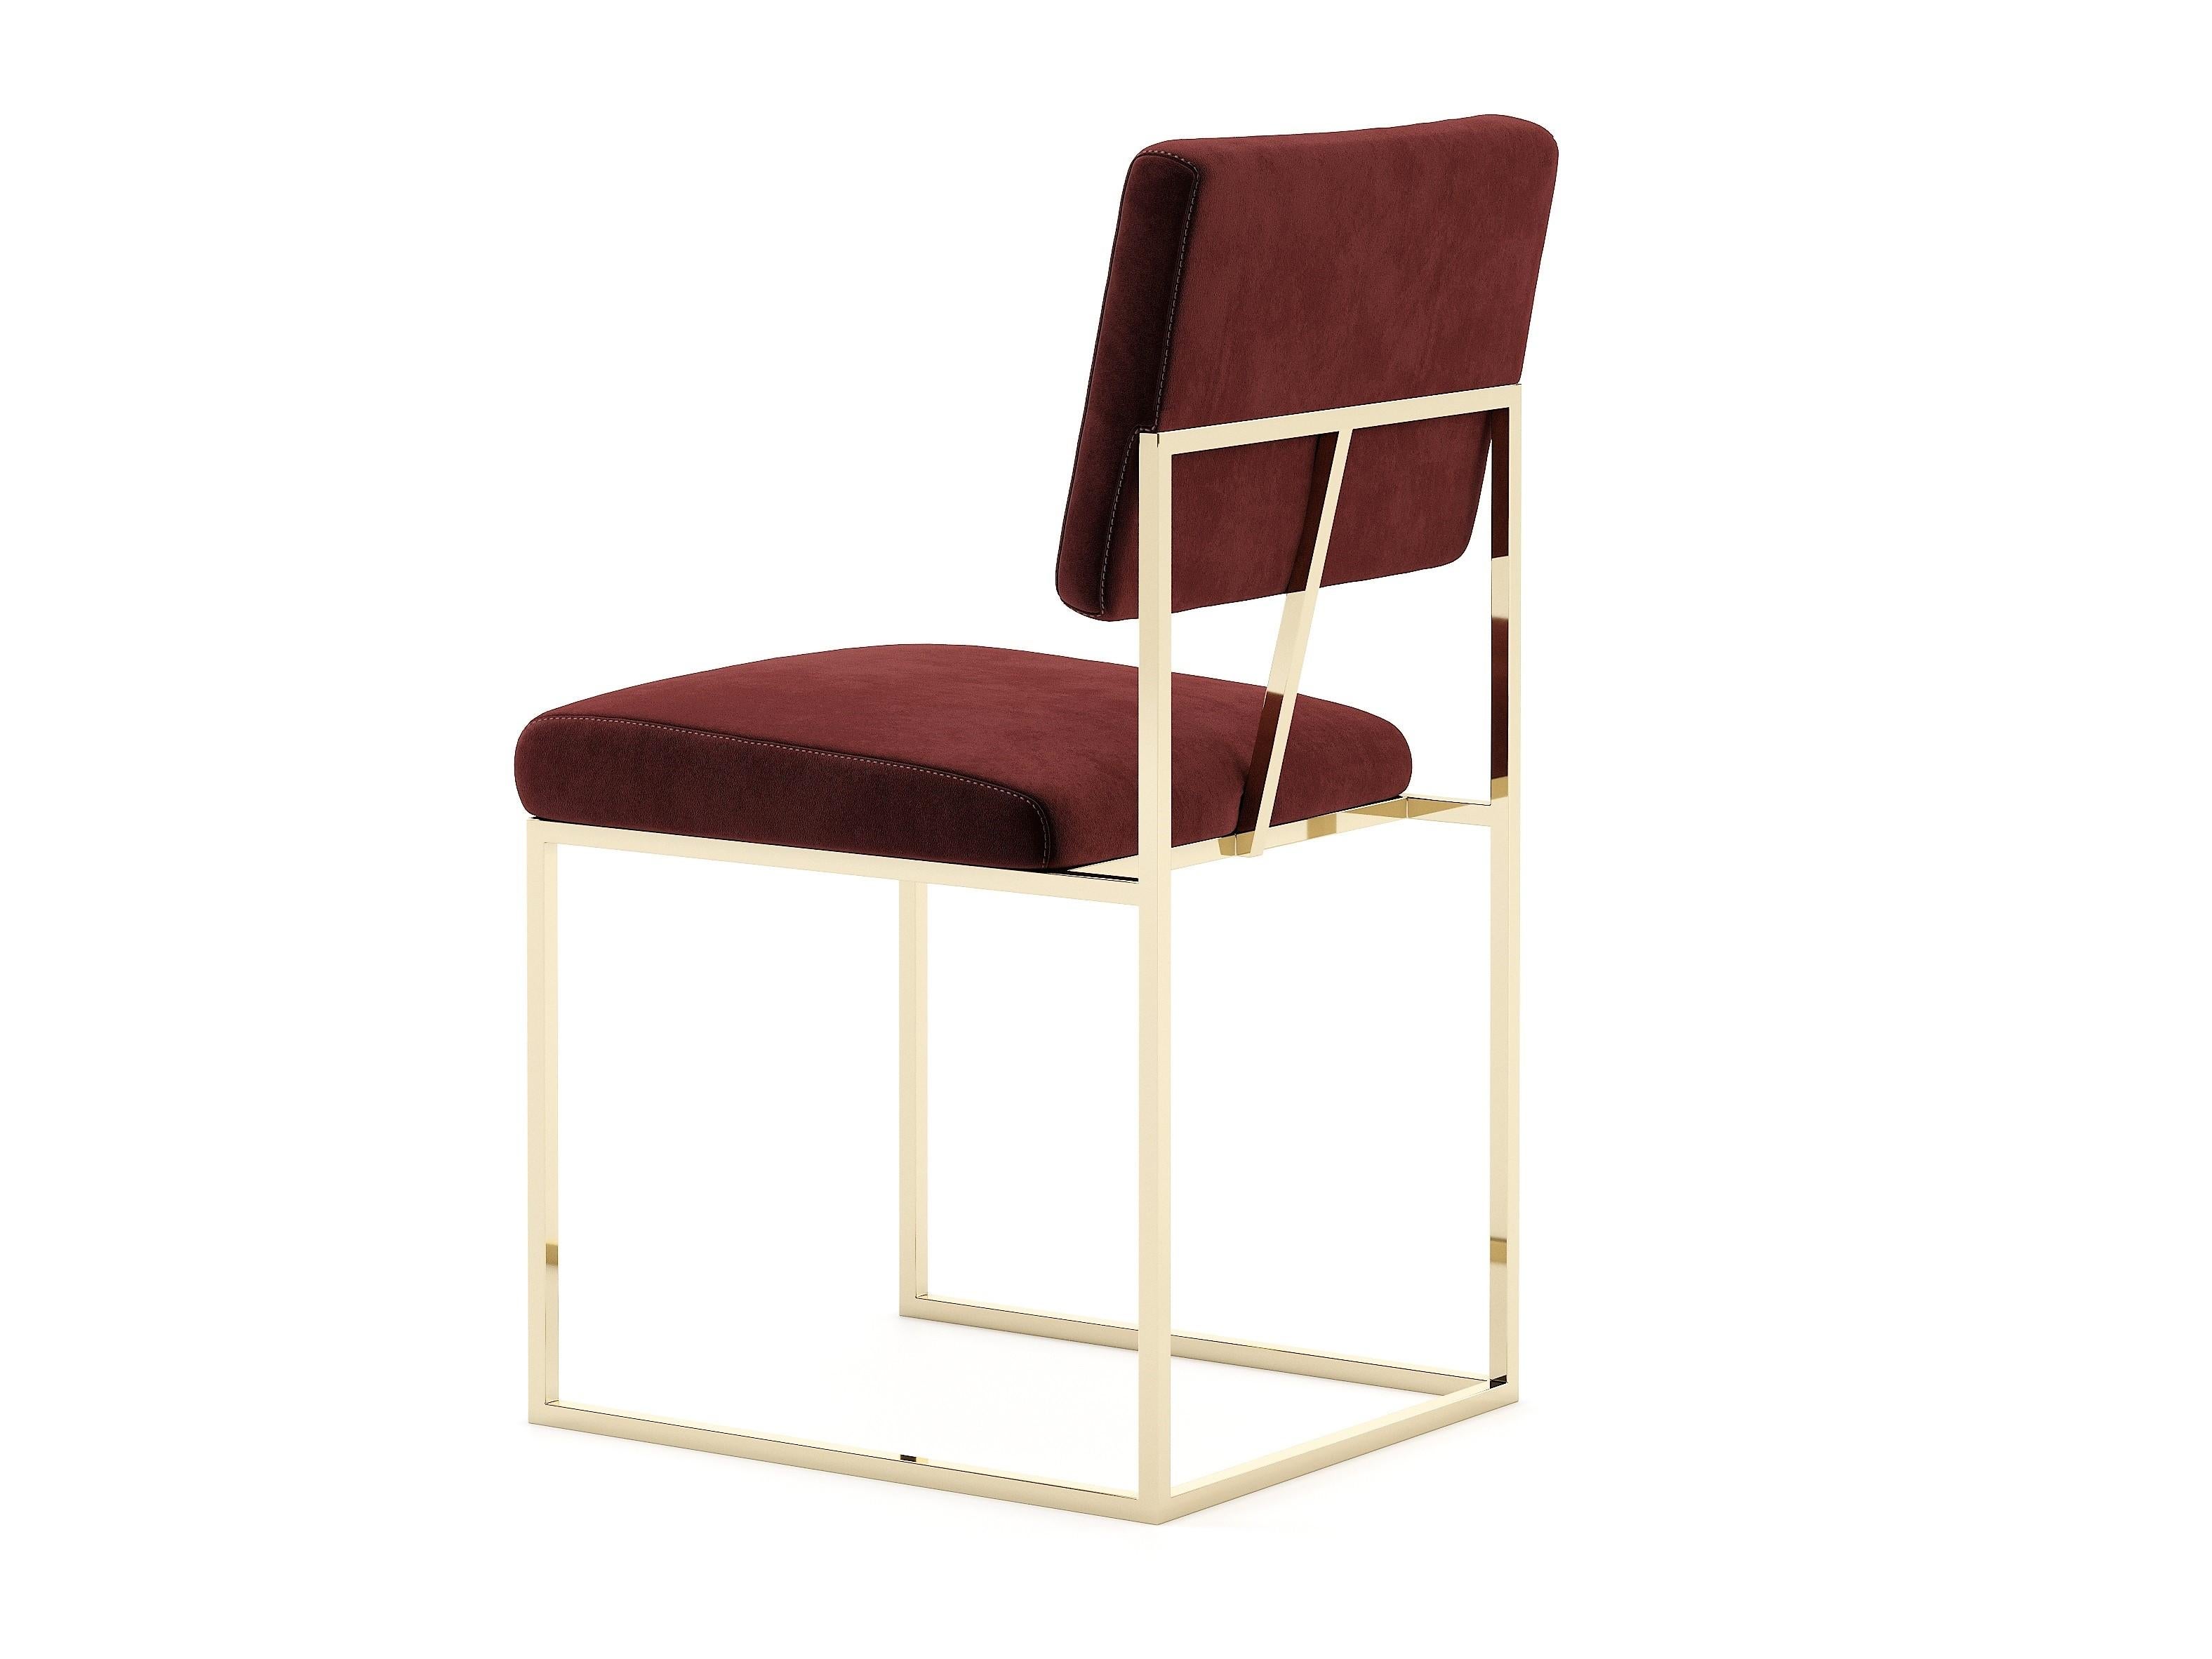 Contemporary Minimalist style dining chair featuring sleek metal legs in a satin brass tone.
Seat and back upholstered in deep Bordeaux cotton velvet.
Materials: Stainless steel, velvet.
Finishes: Satin brass, Bordeaux.
Handcrafted in